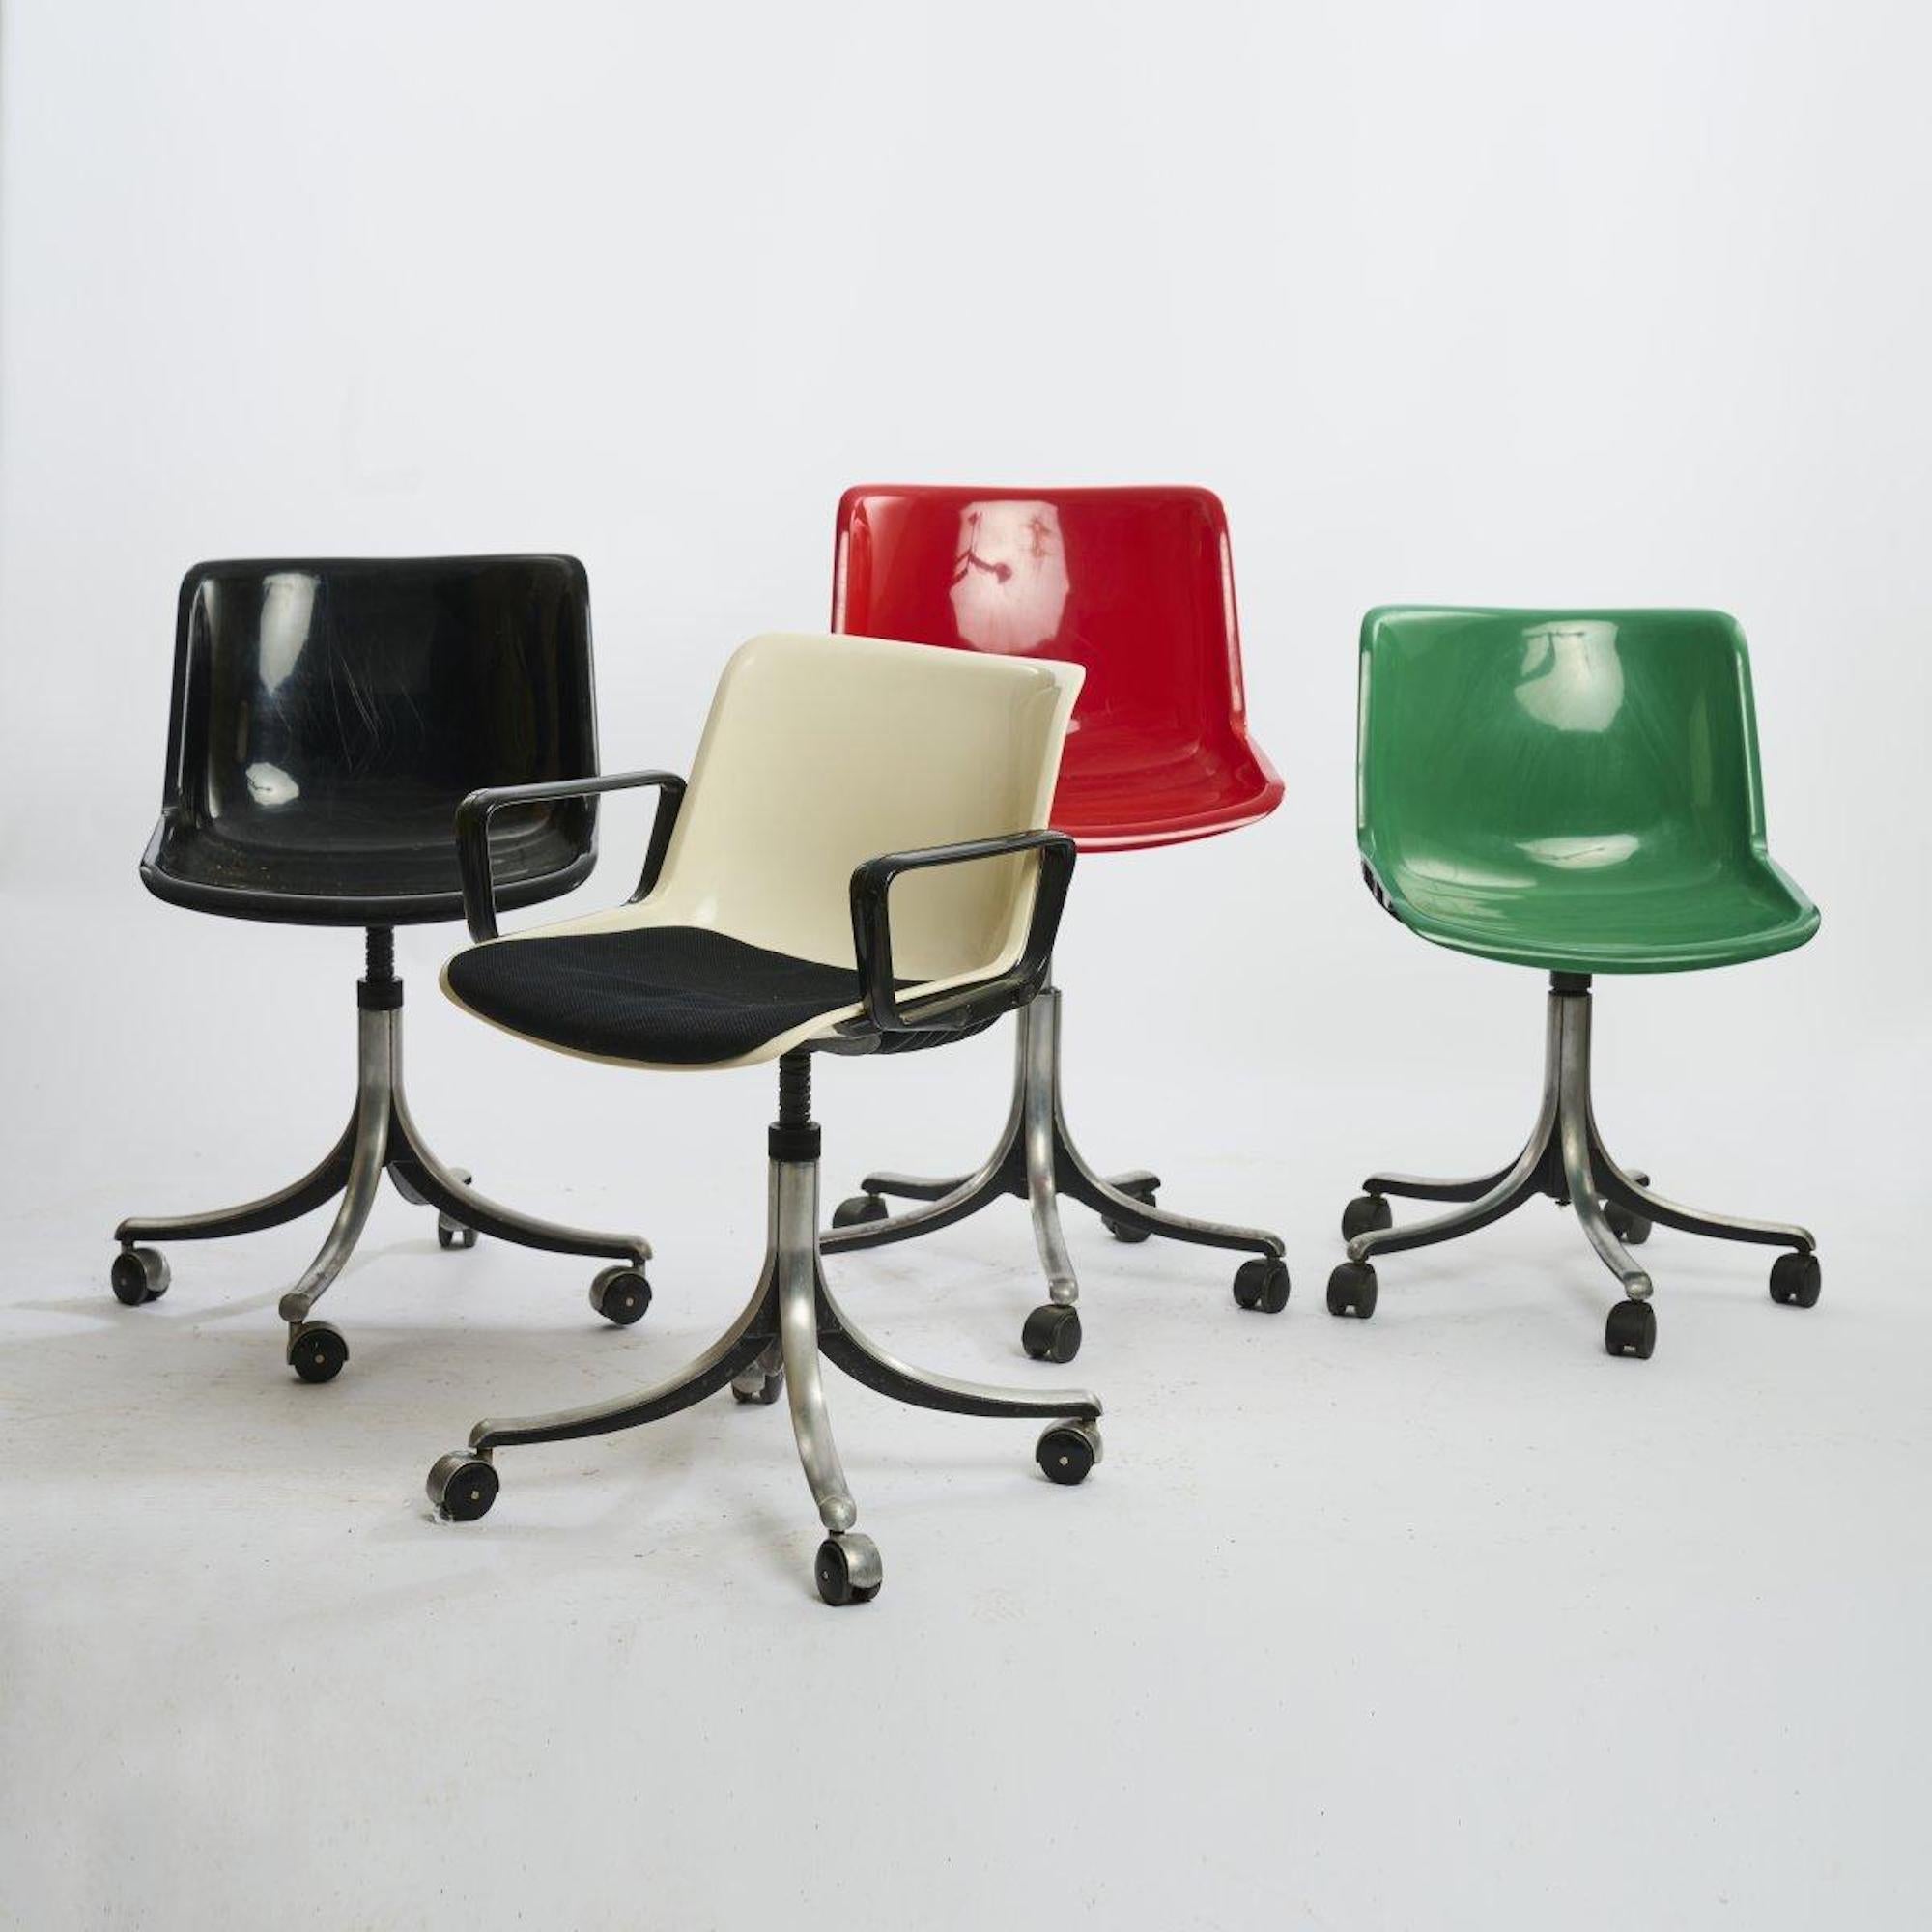 Four Modus Work Chairs by Centro Progetti Tecno, 1972. For Sale 6